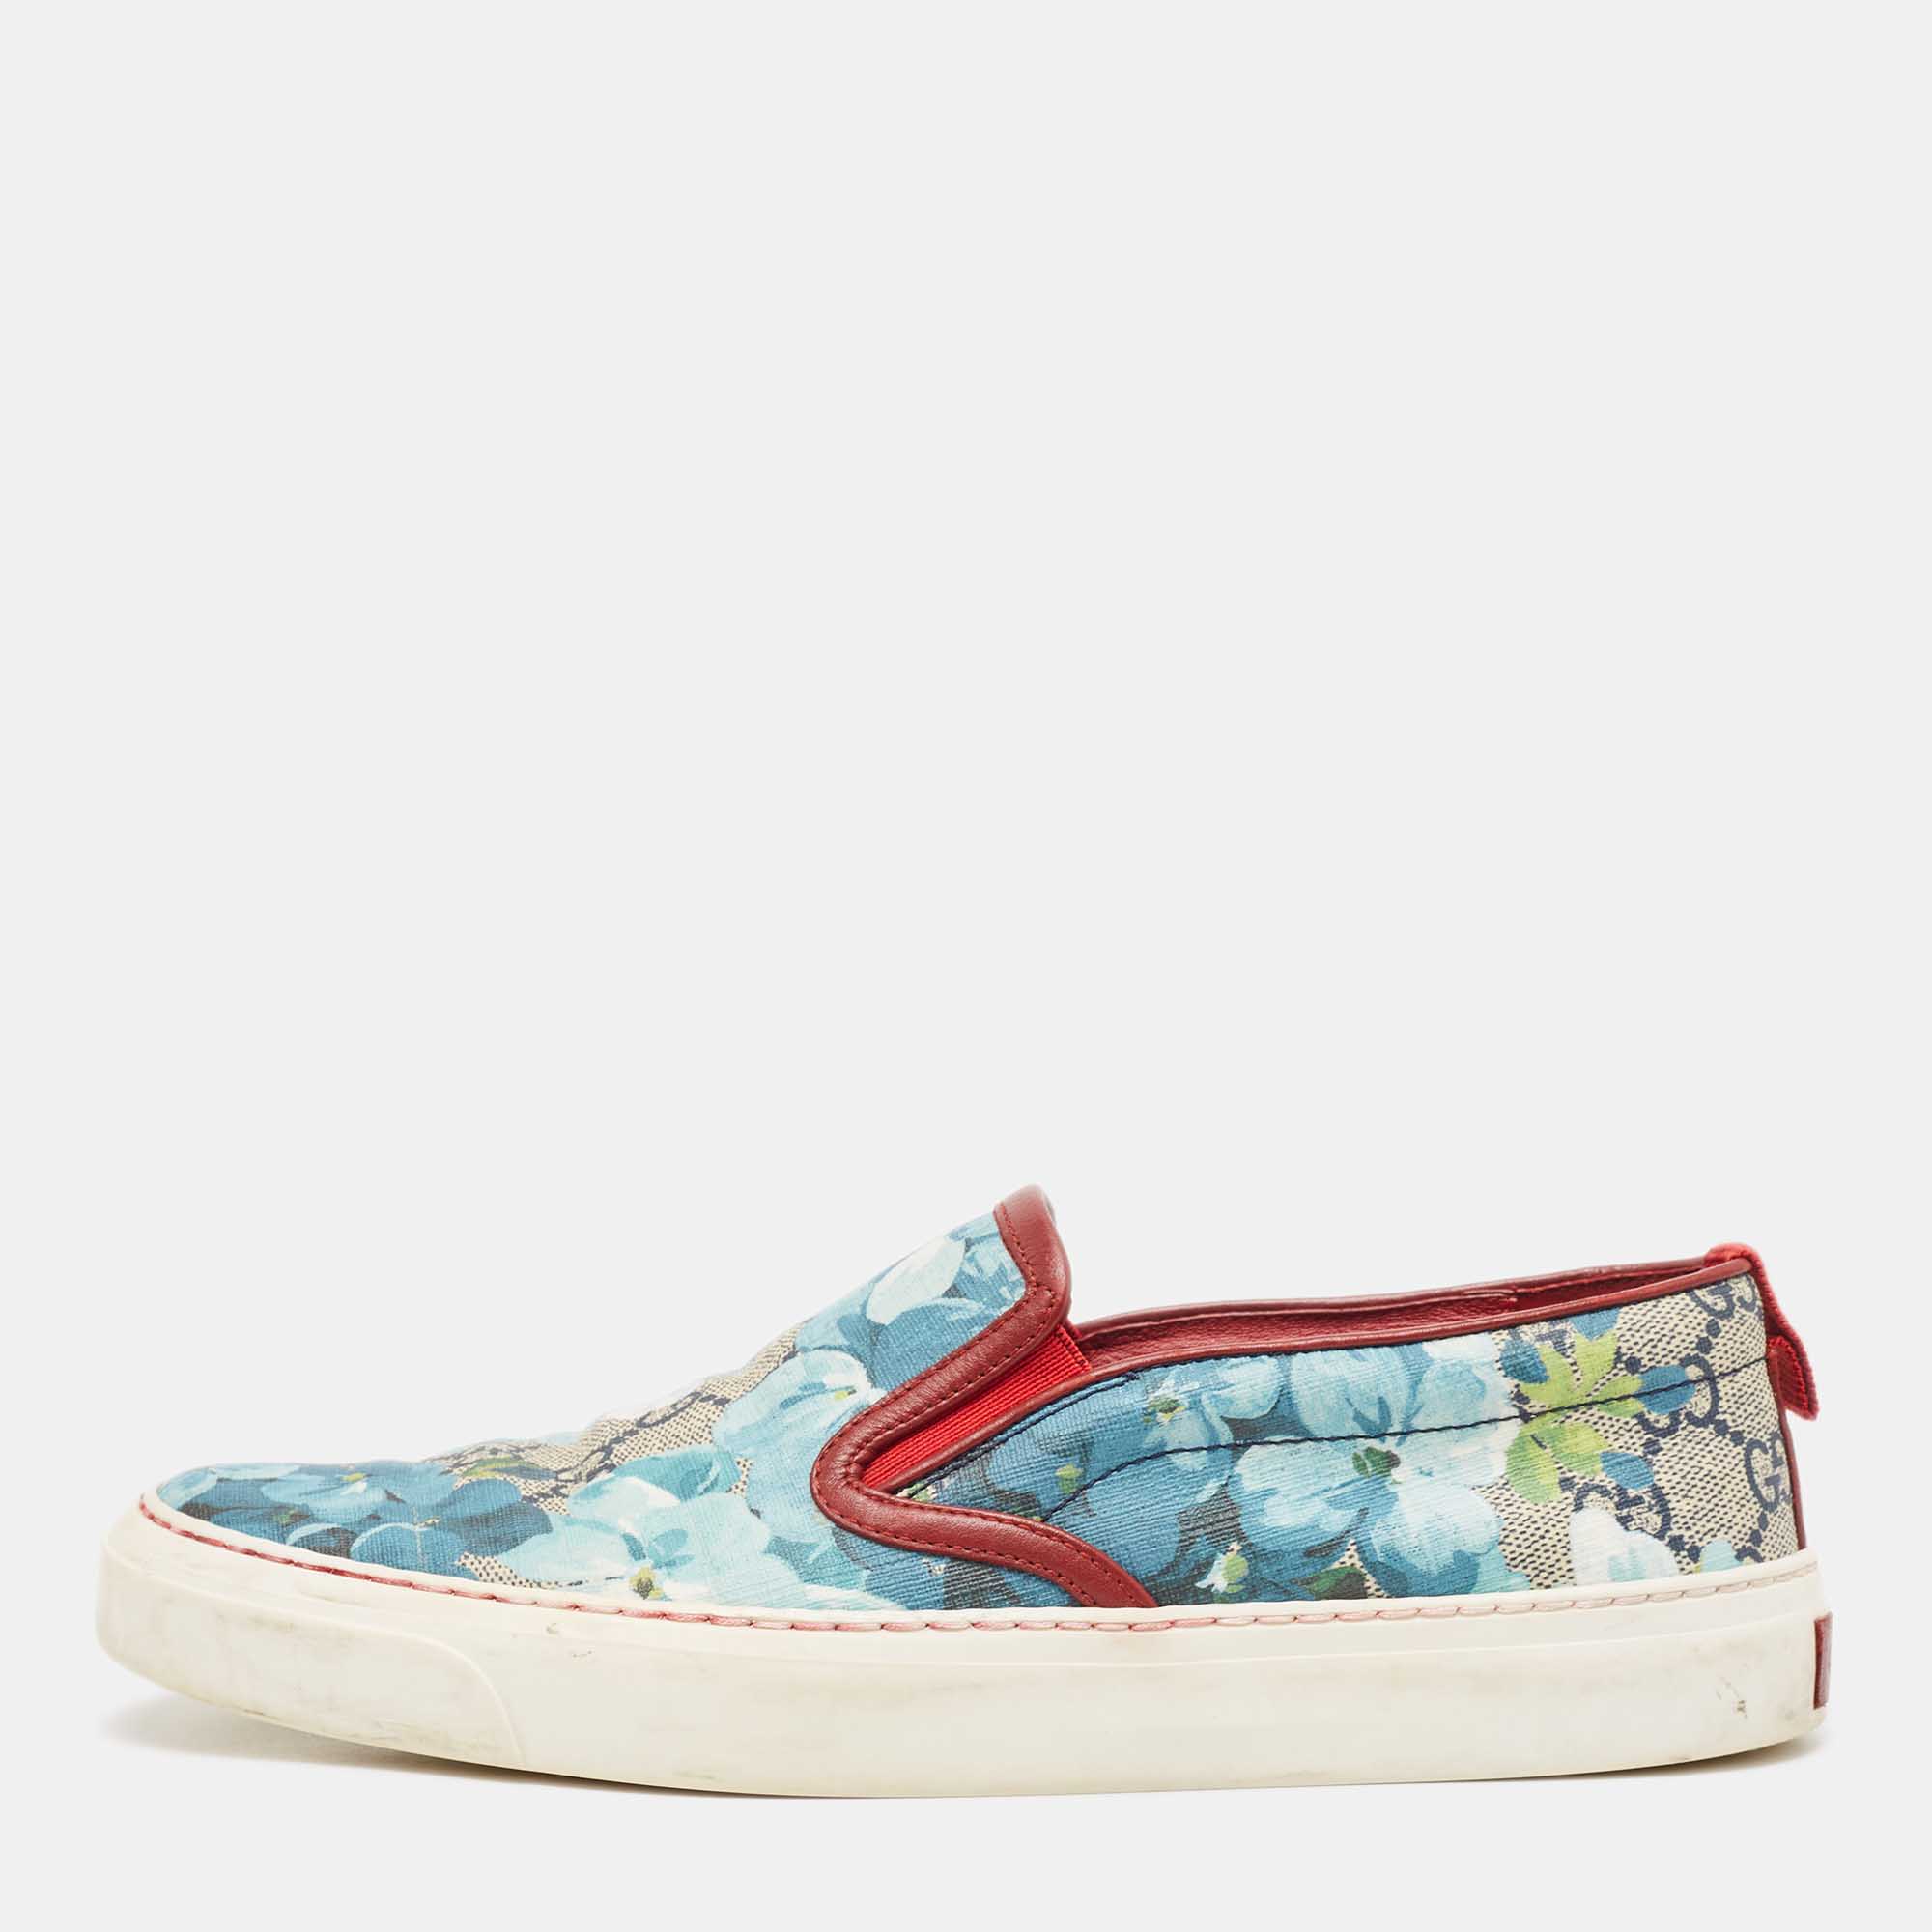 Pre-owned Gucci Multicolor Gg Supreme Blooms Printed Canvas Slip On Sneakers Size 37.5